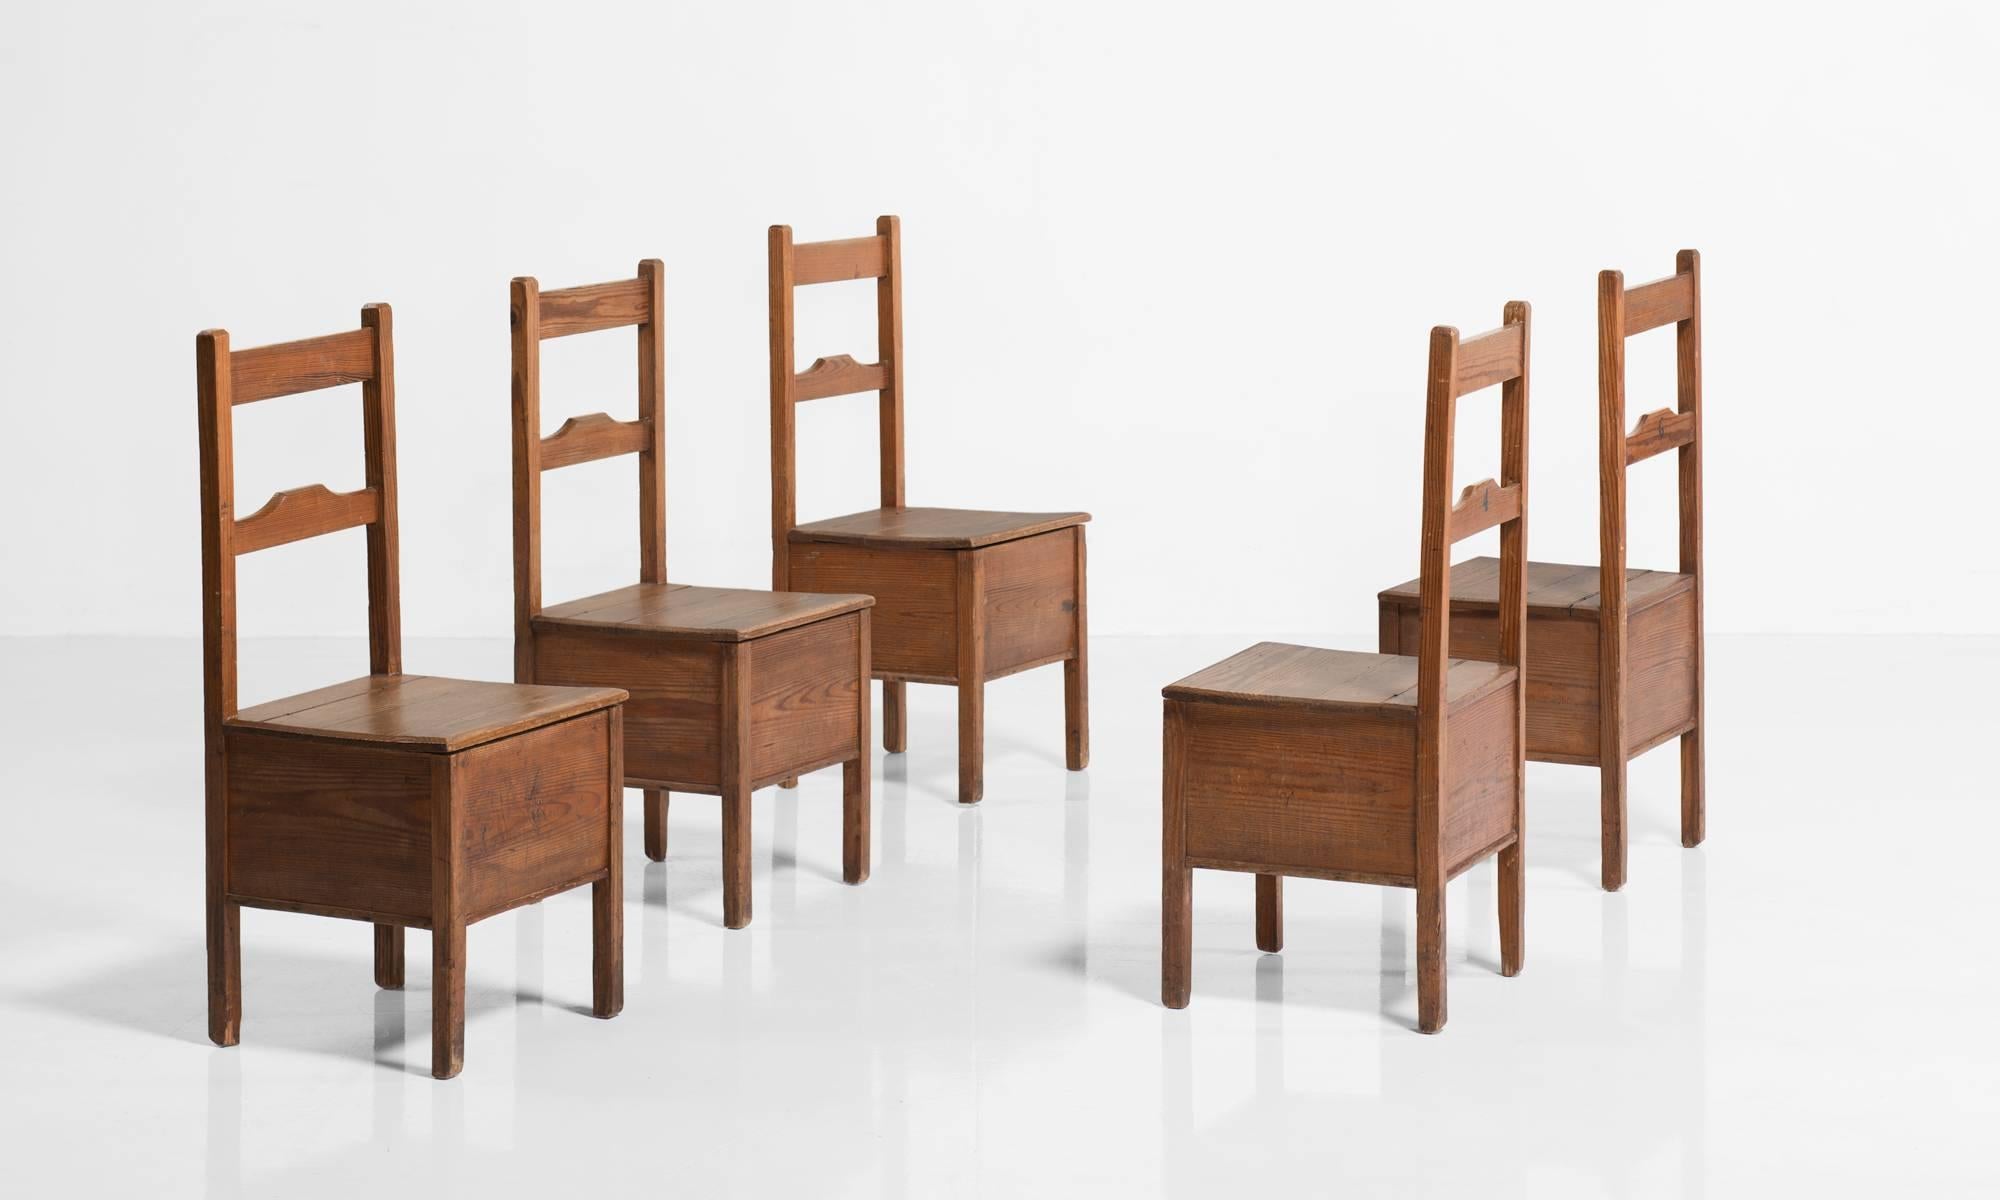 Pine box seat chairs, England, circa 1880.

Each chair is numbered on the back, and has storage underneath the seat.